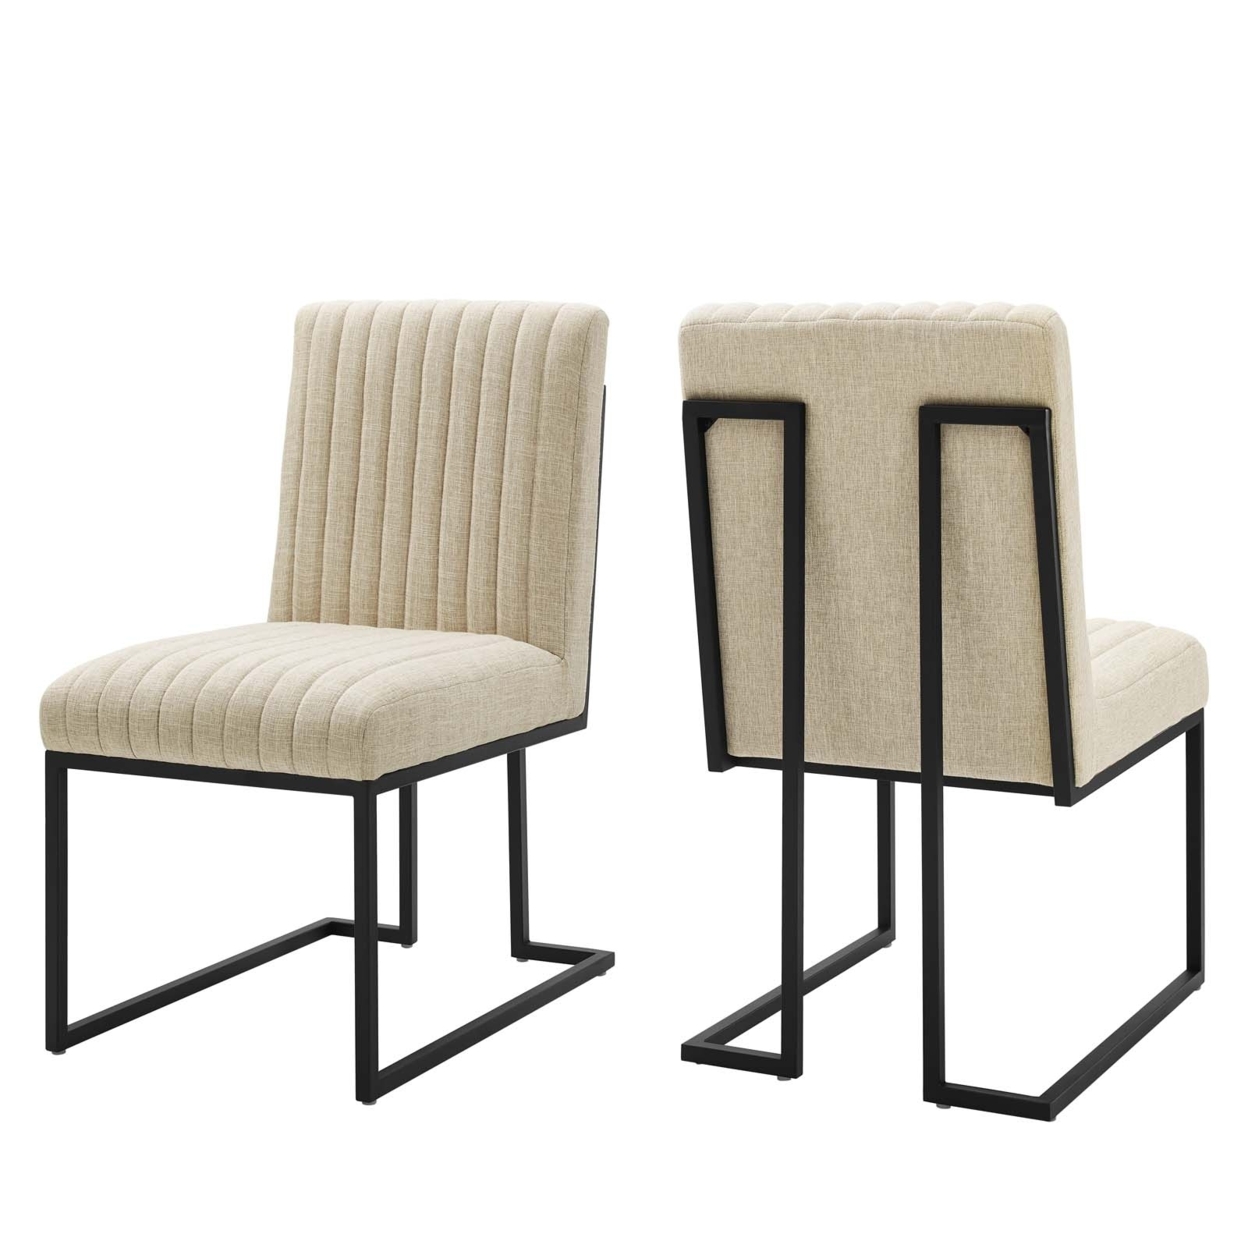 Indulge Channel Tufted Fabric Dining Chairs - Set Of 2, Beige